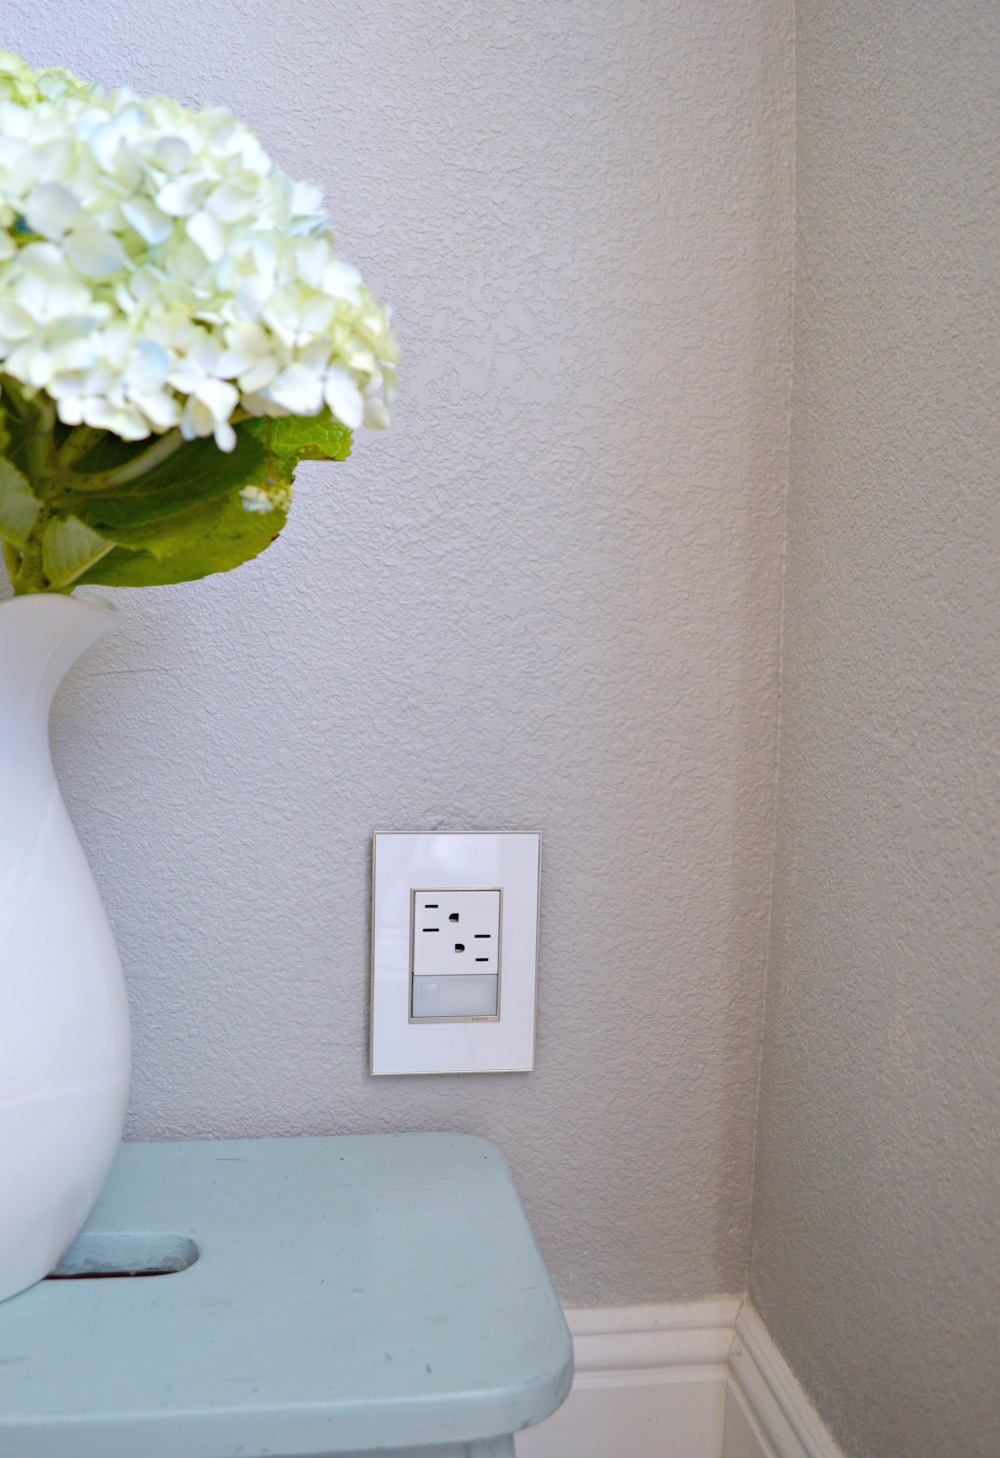 Updating Your Outlets With adorne